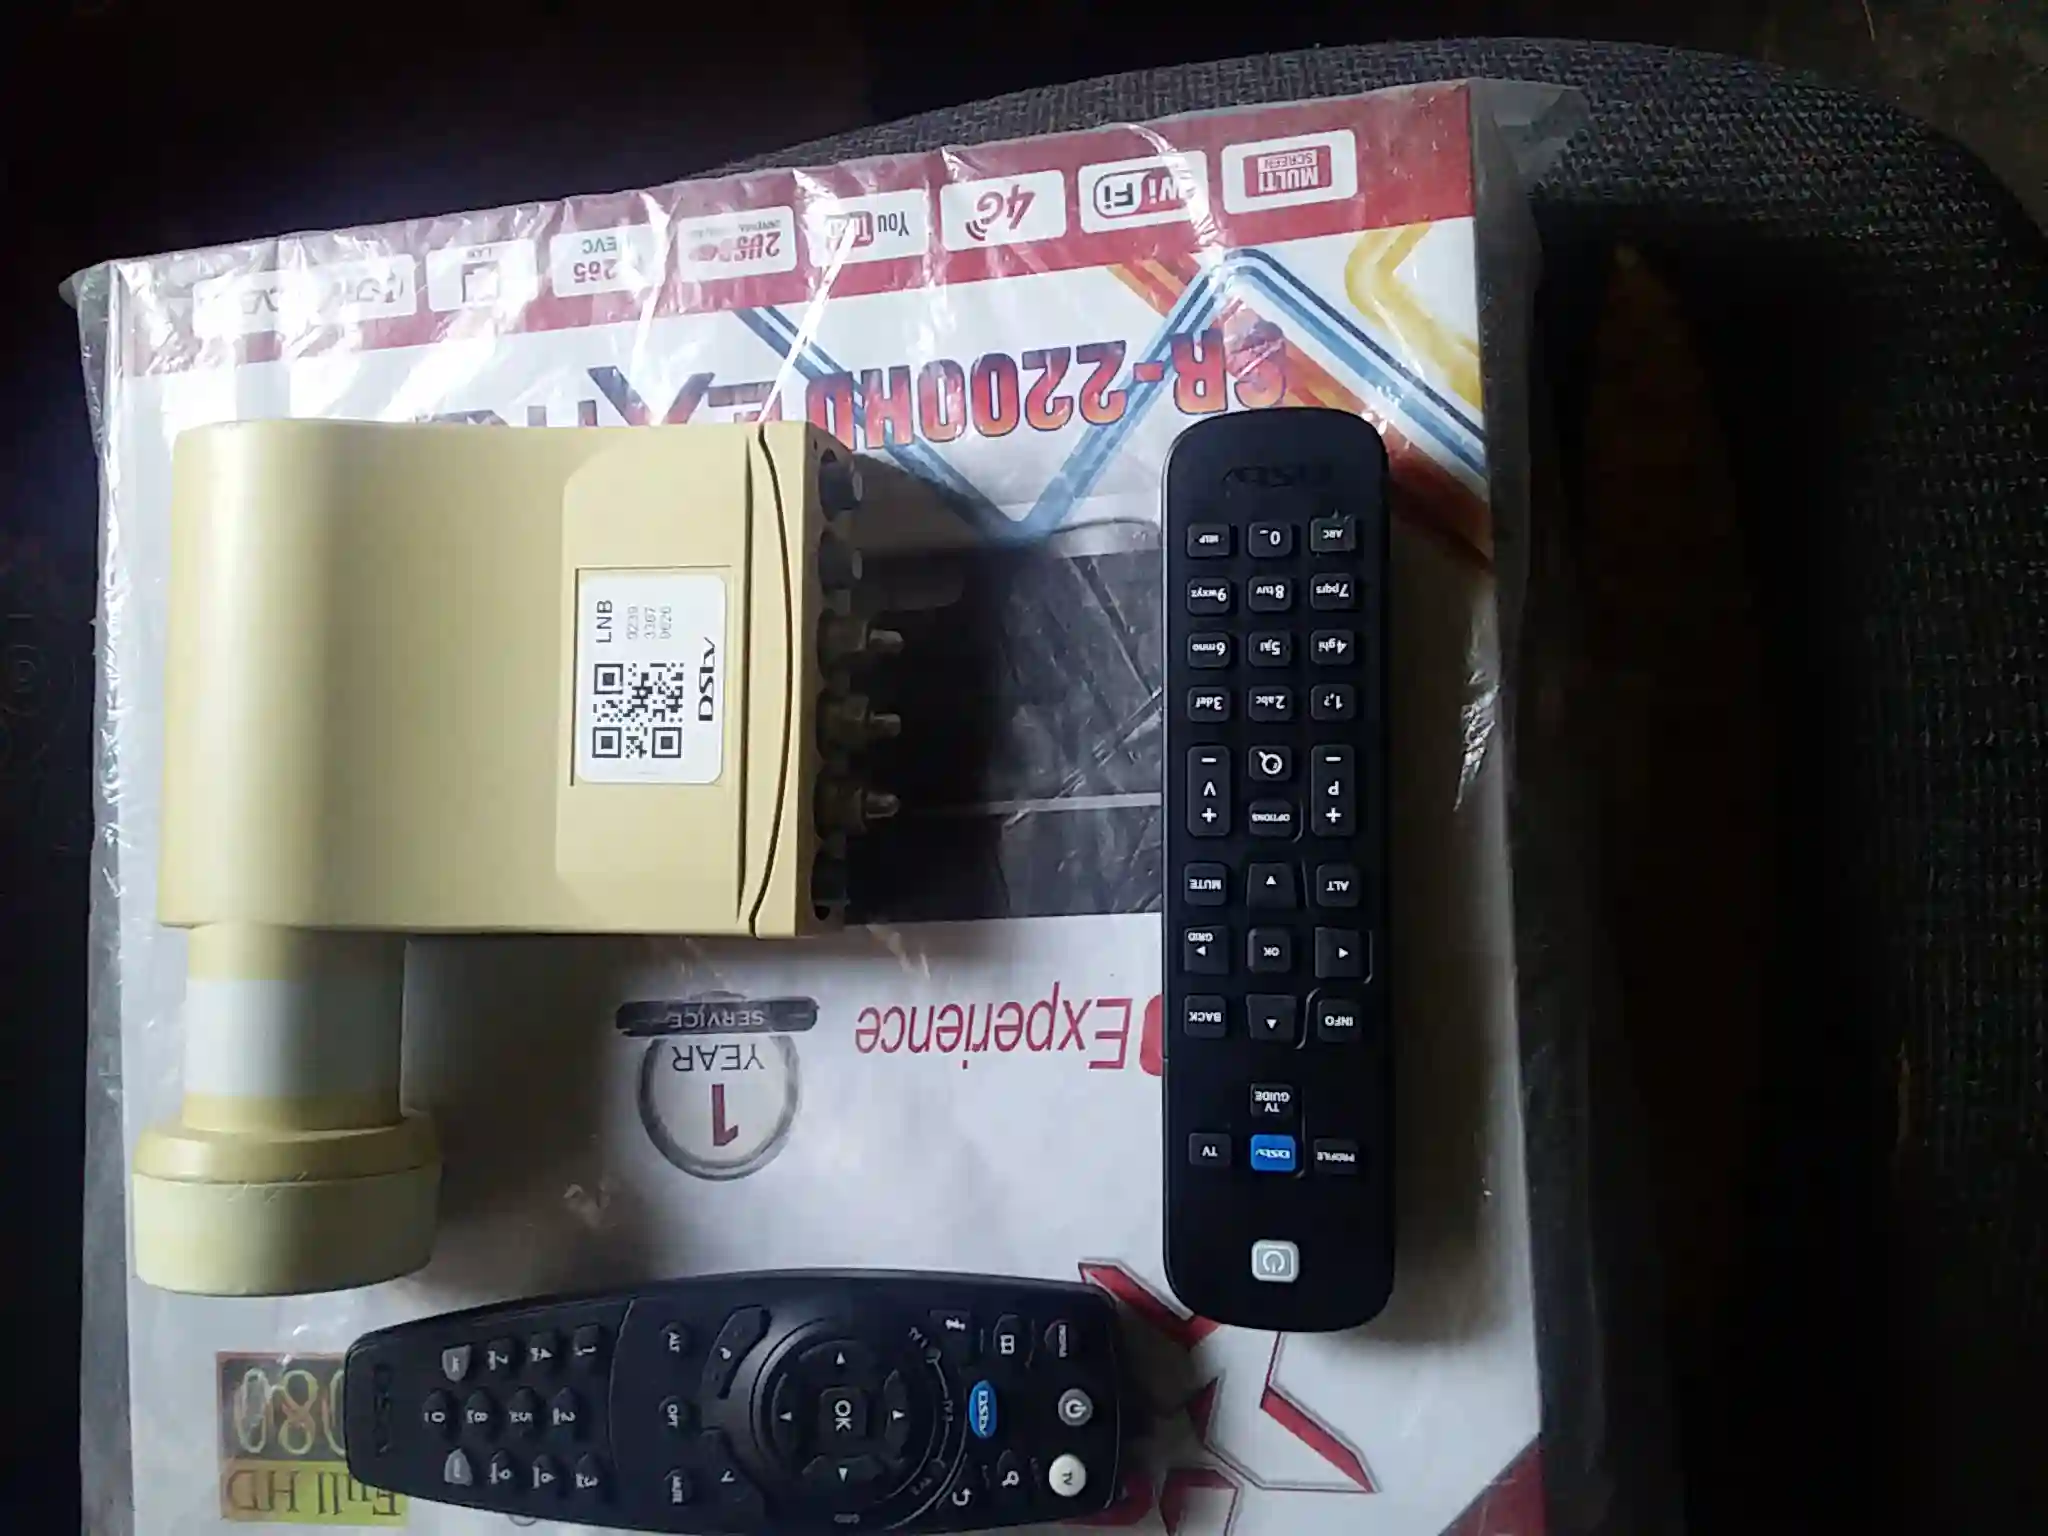 Lnb remotes for sale everything must go $30